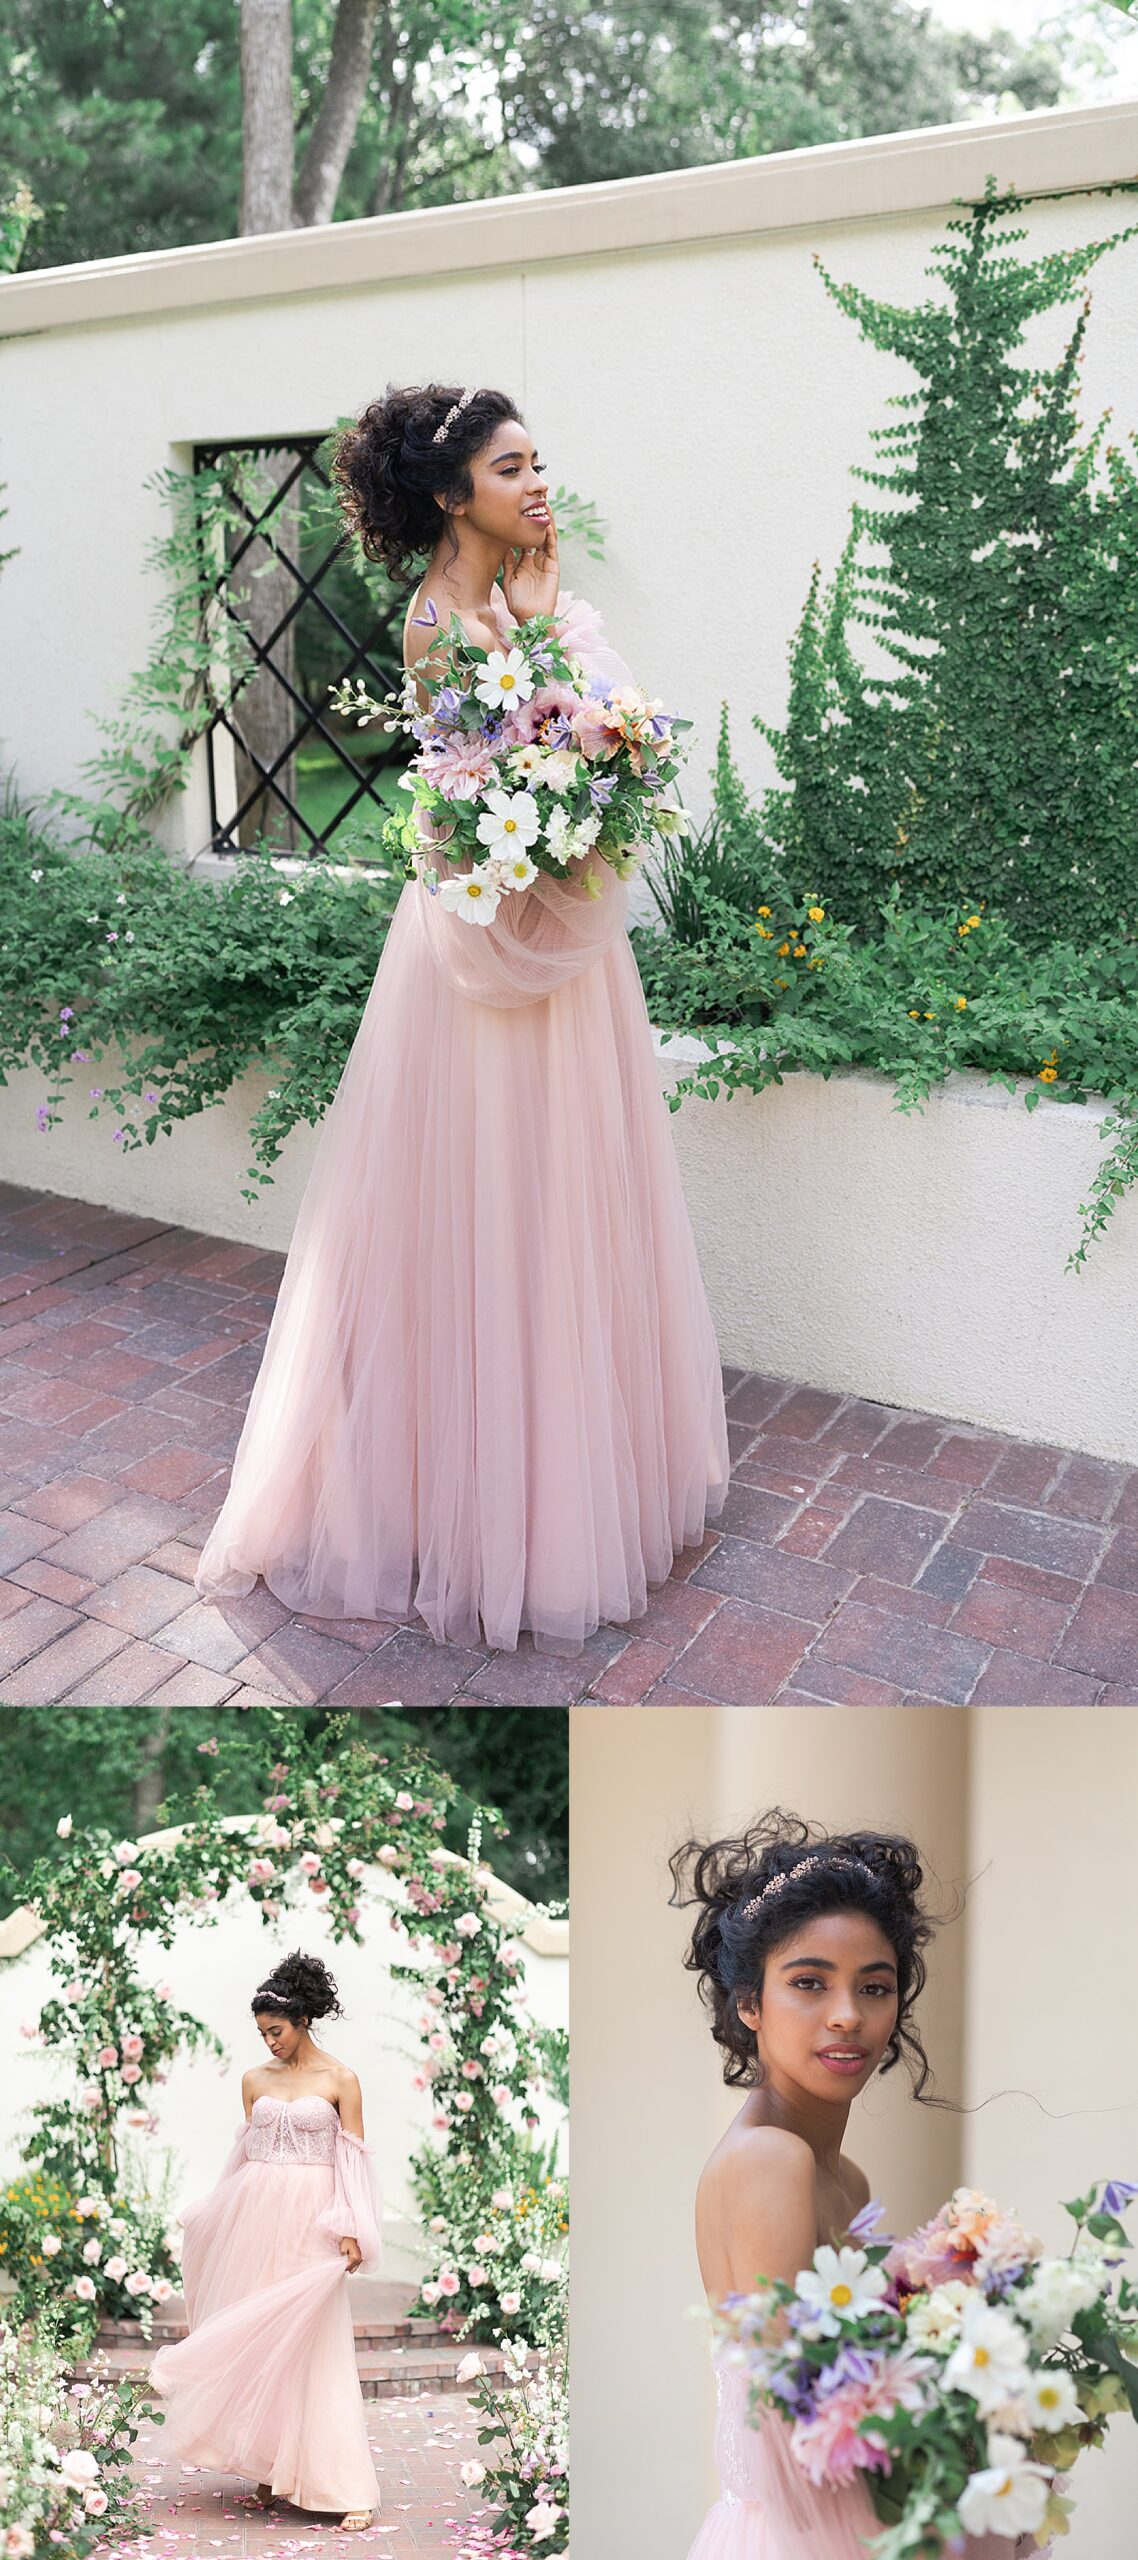 Stunning floral installations perfectly compliments woman's pink gown by Amanda Bee’s Floral Design